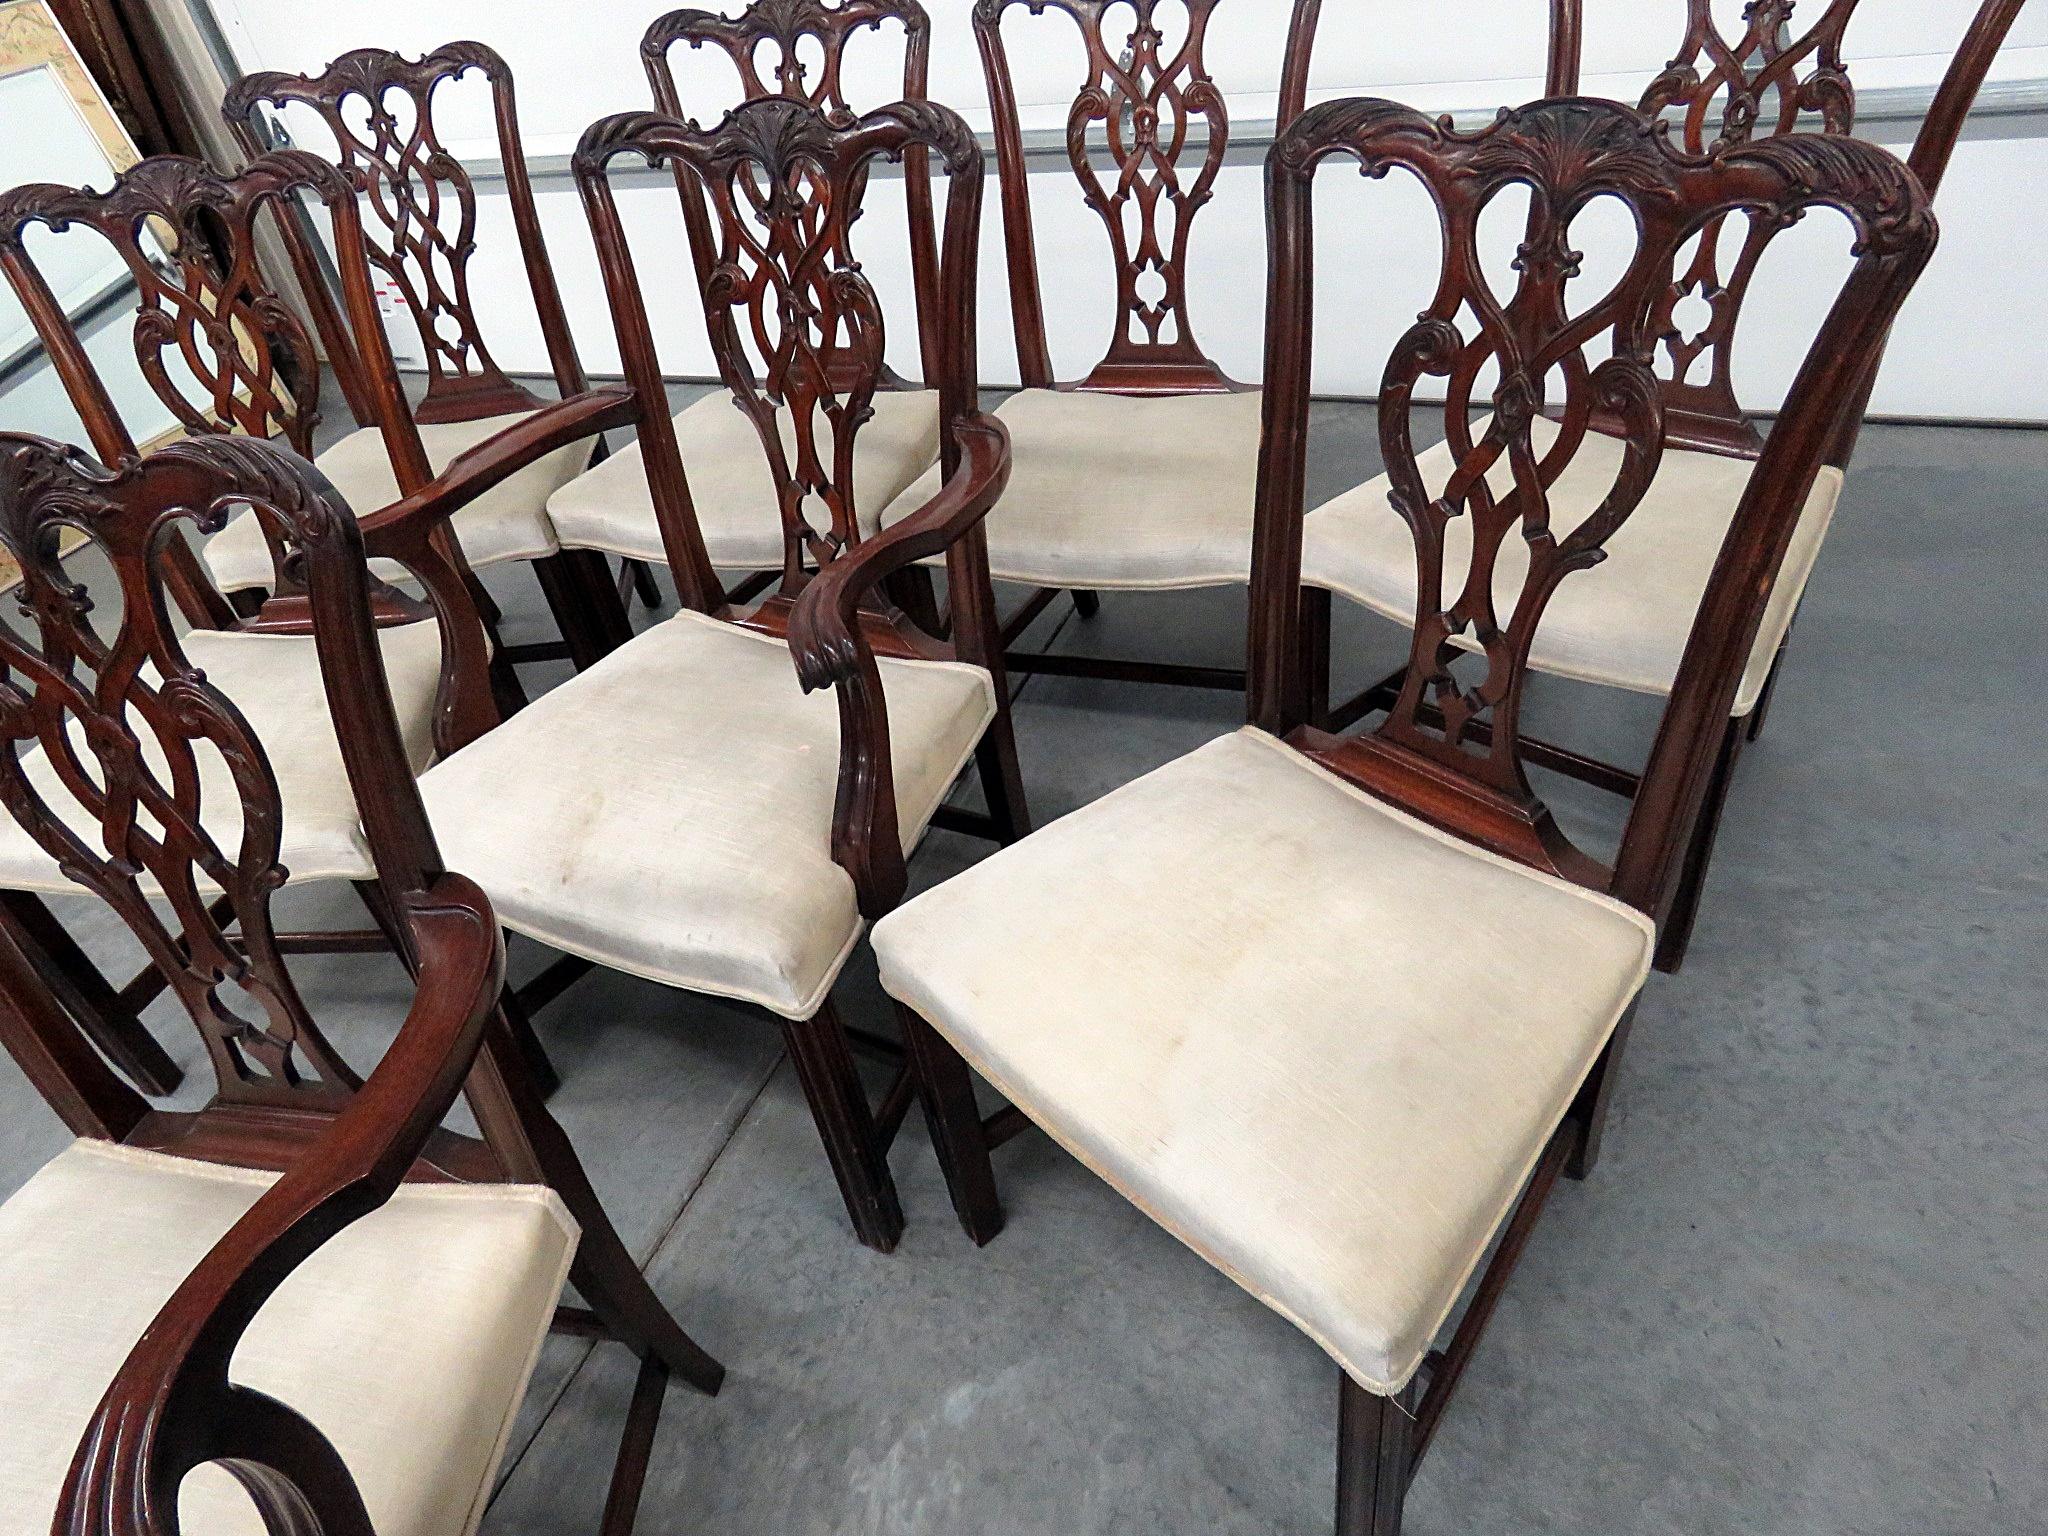 Upholstery Set of 8 Georgian Style Dining Room Chairs